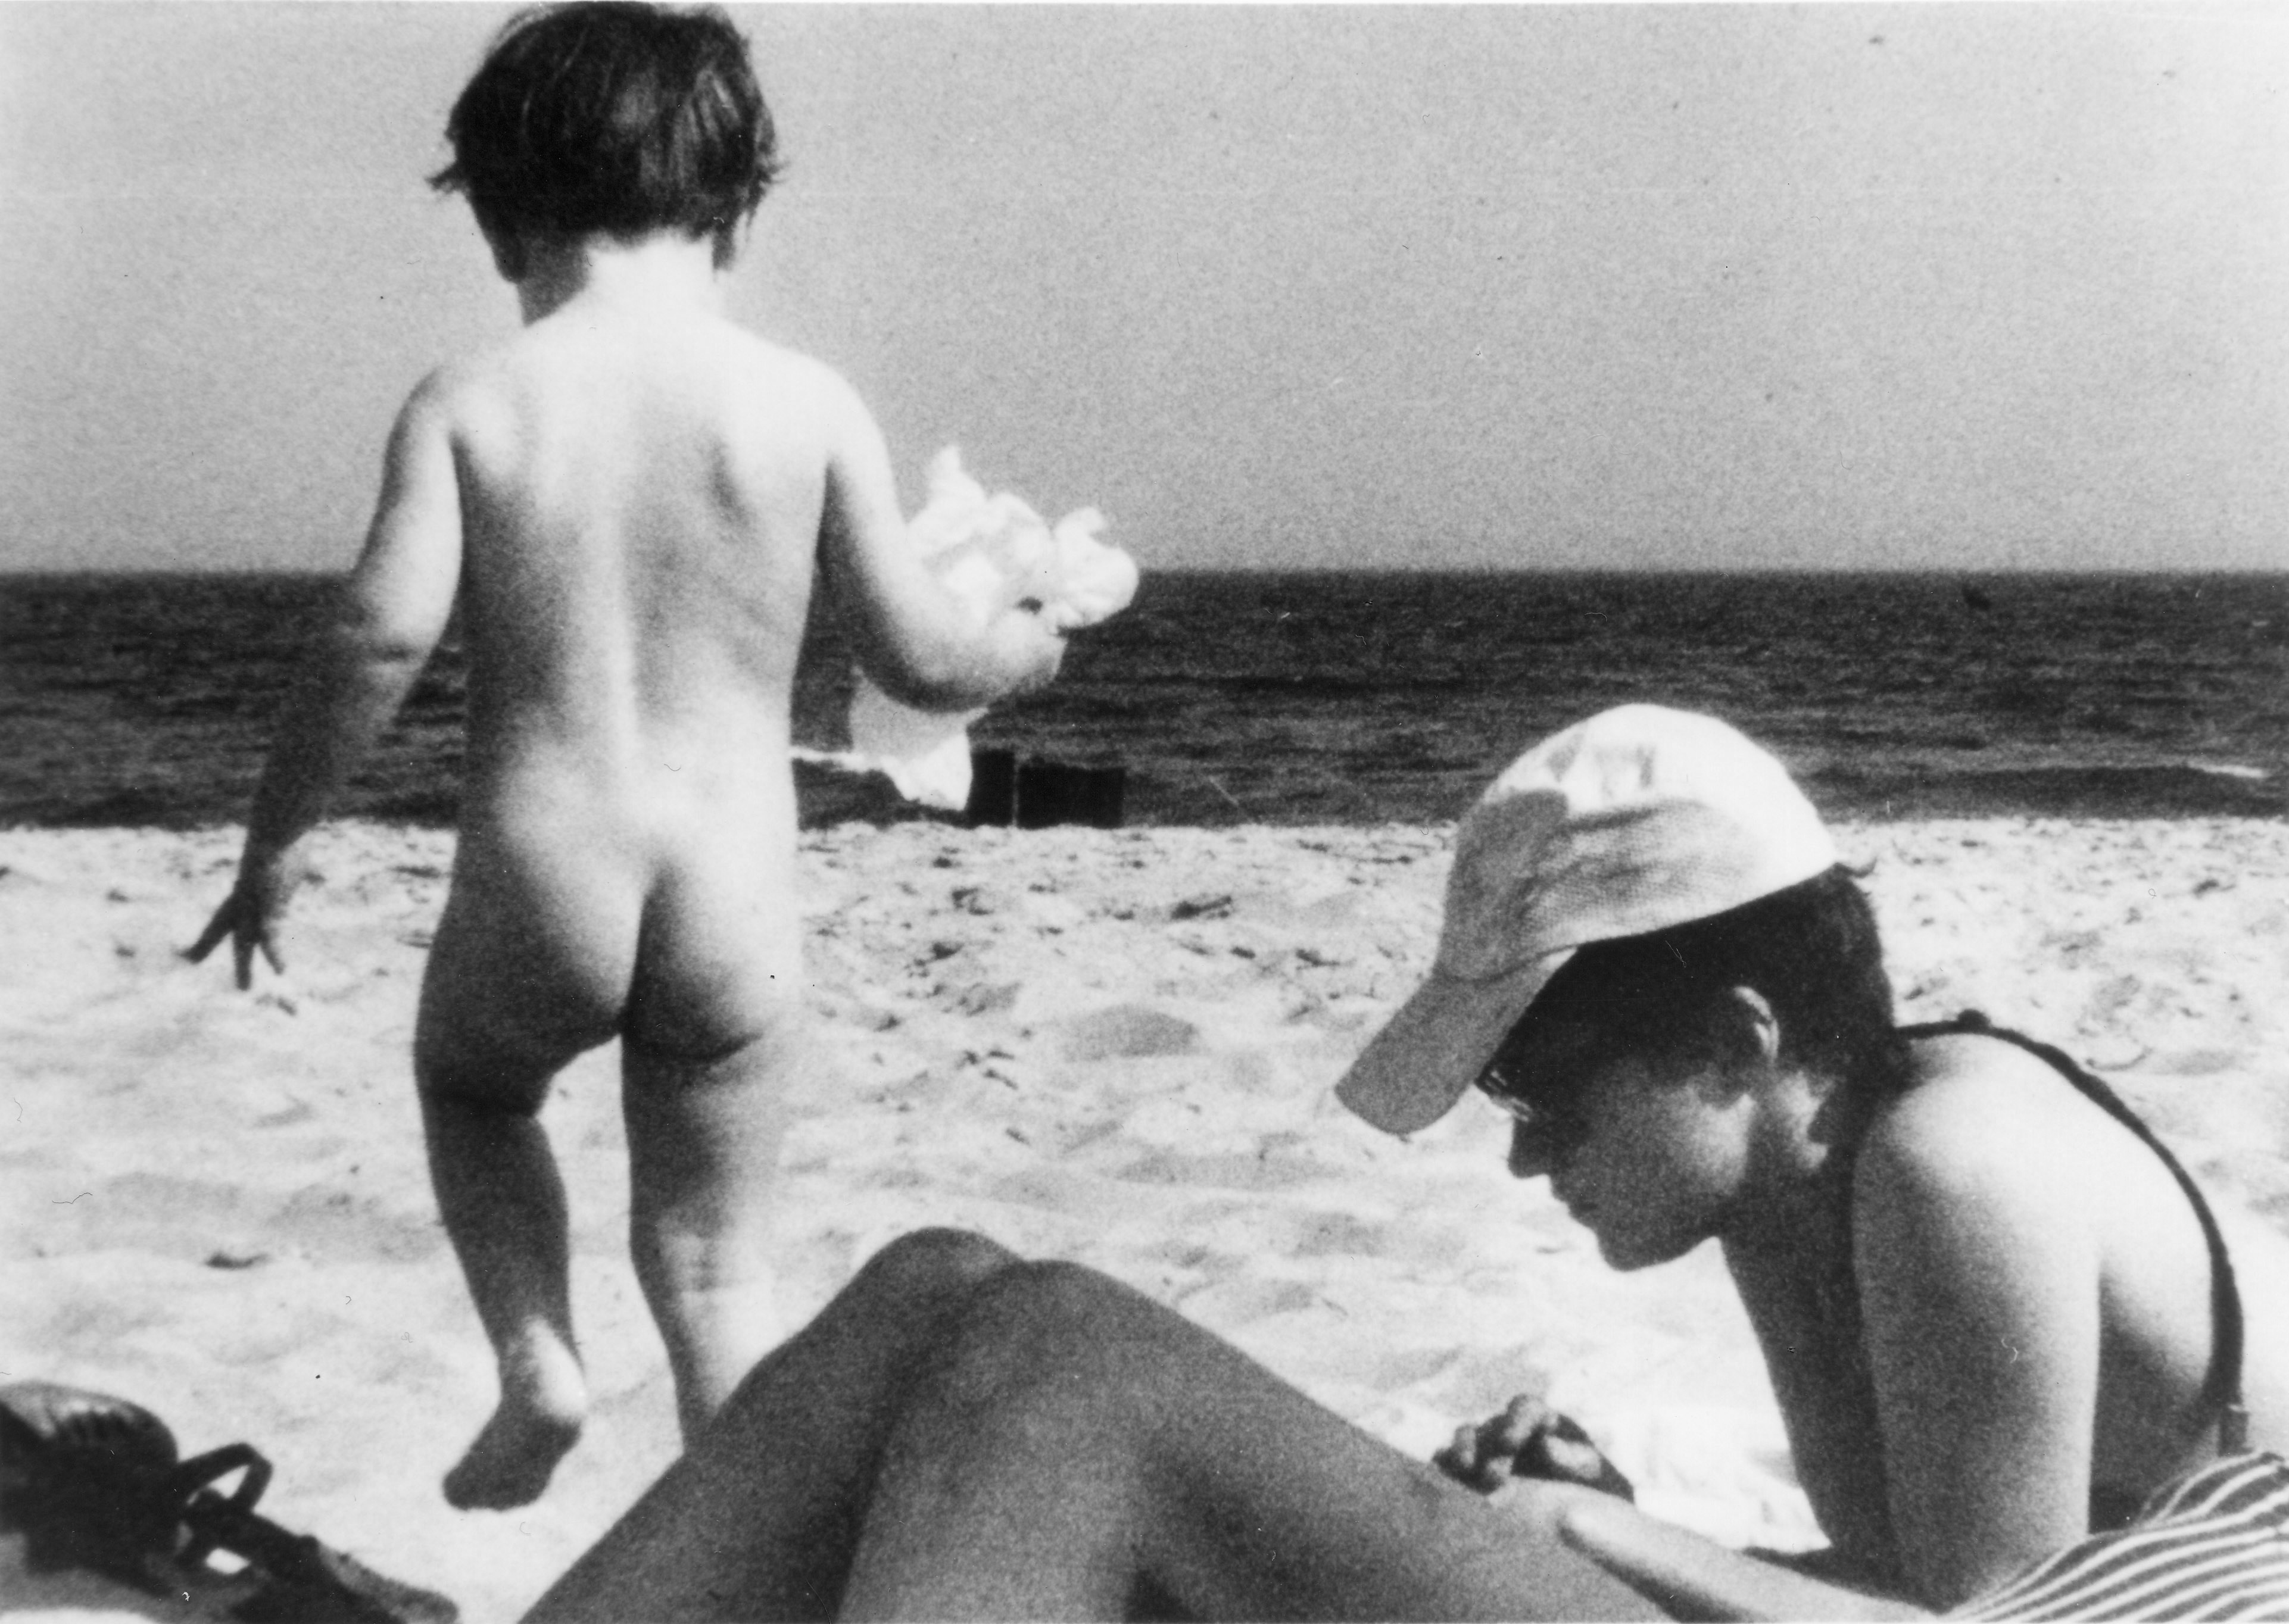 Black and white photo of a naked baby running on the beach. Adult person is laying in the sand on stomach wearing a baseball cap, swimsuit, and sunglasses.